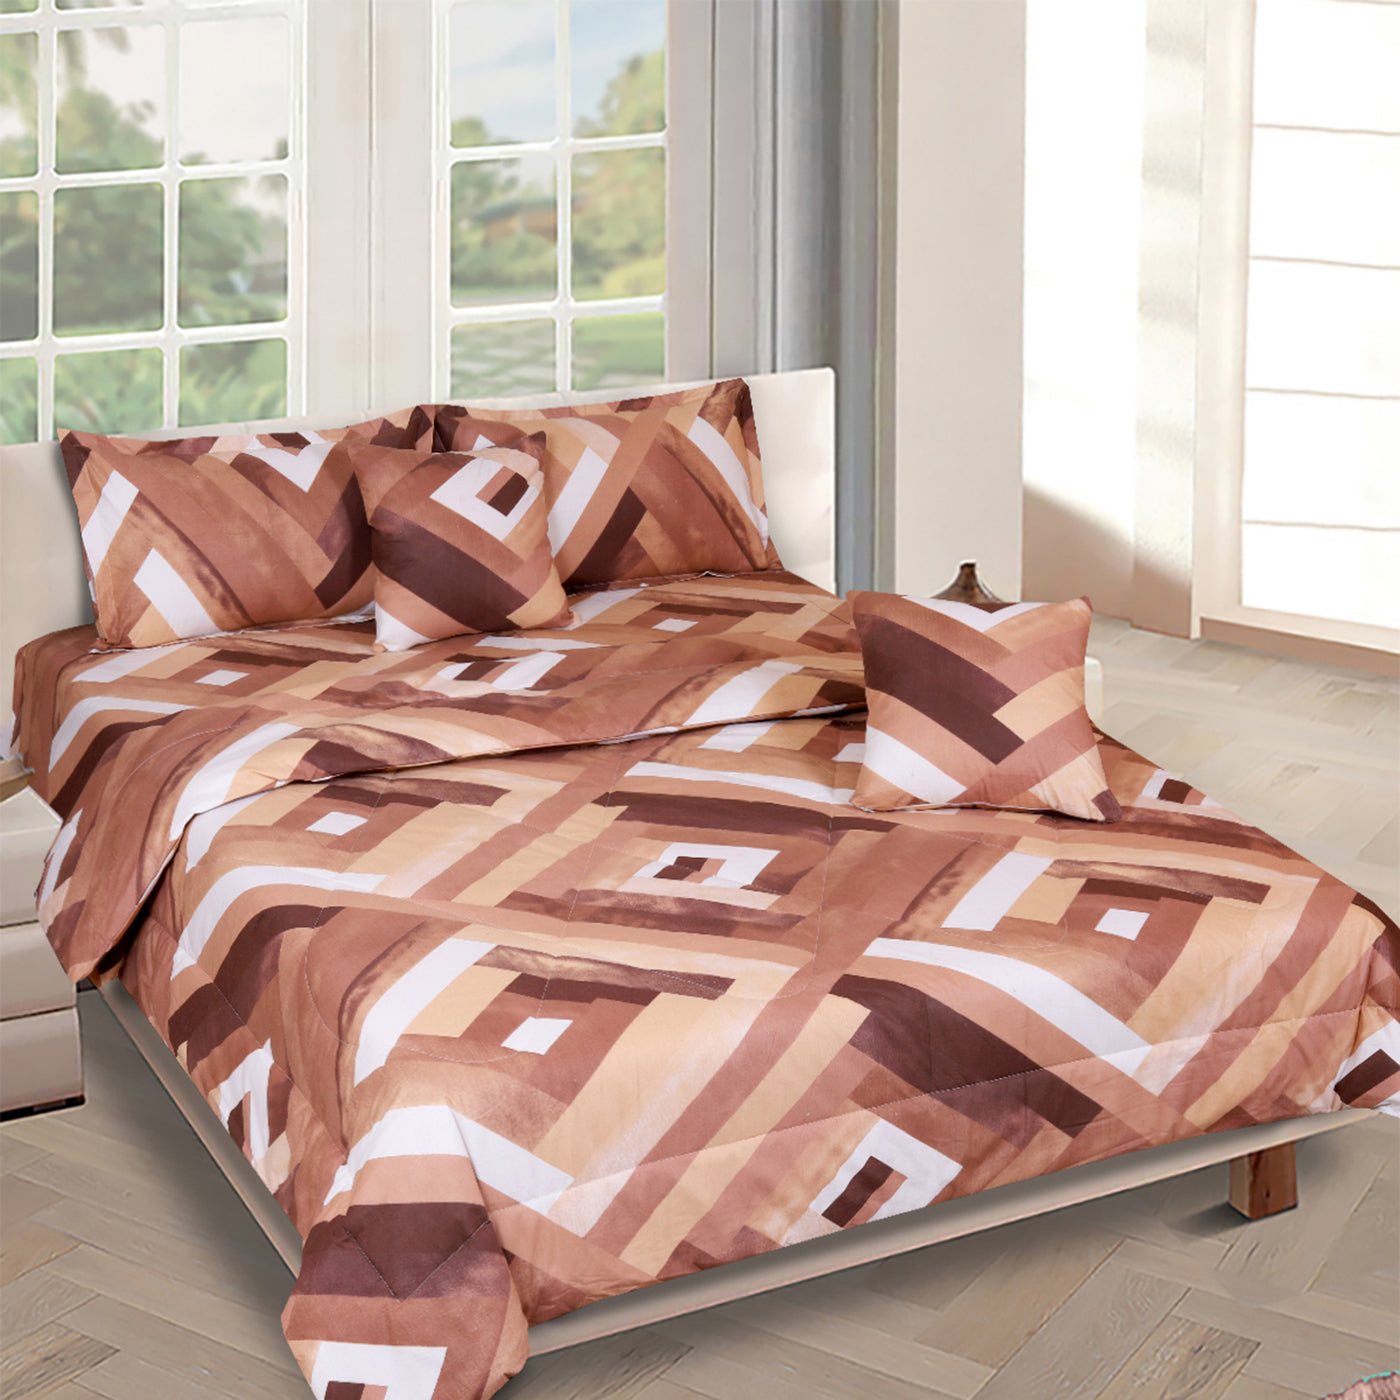 Brown Geometric Printed Cotton Double Queen Bedding Set With Pillow Cover